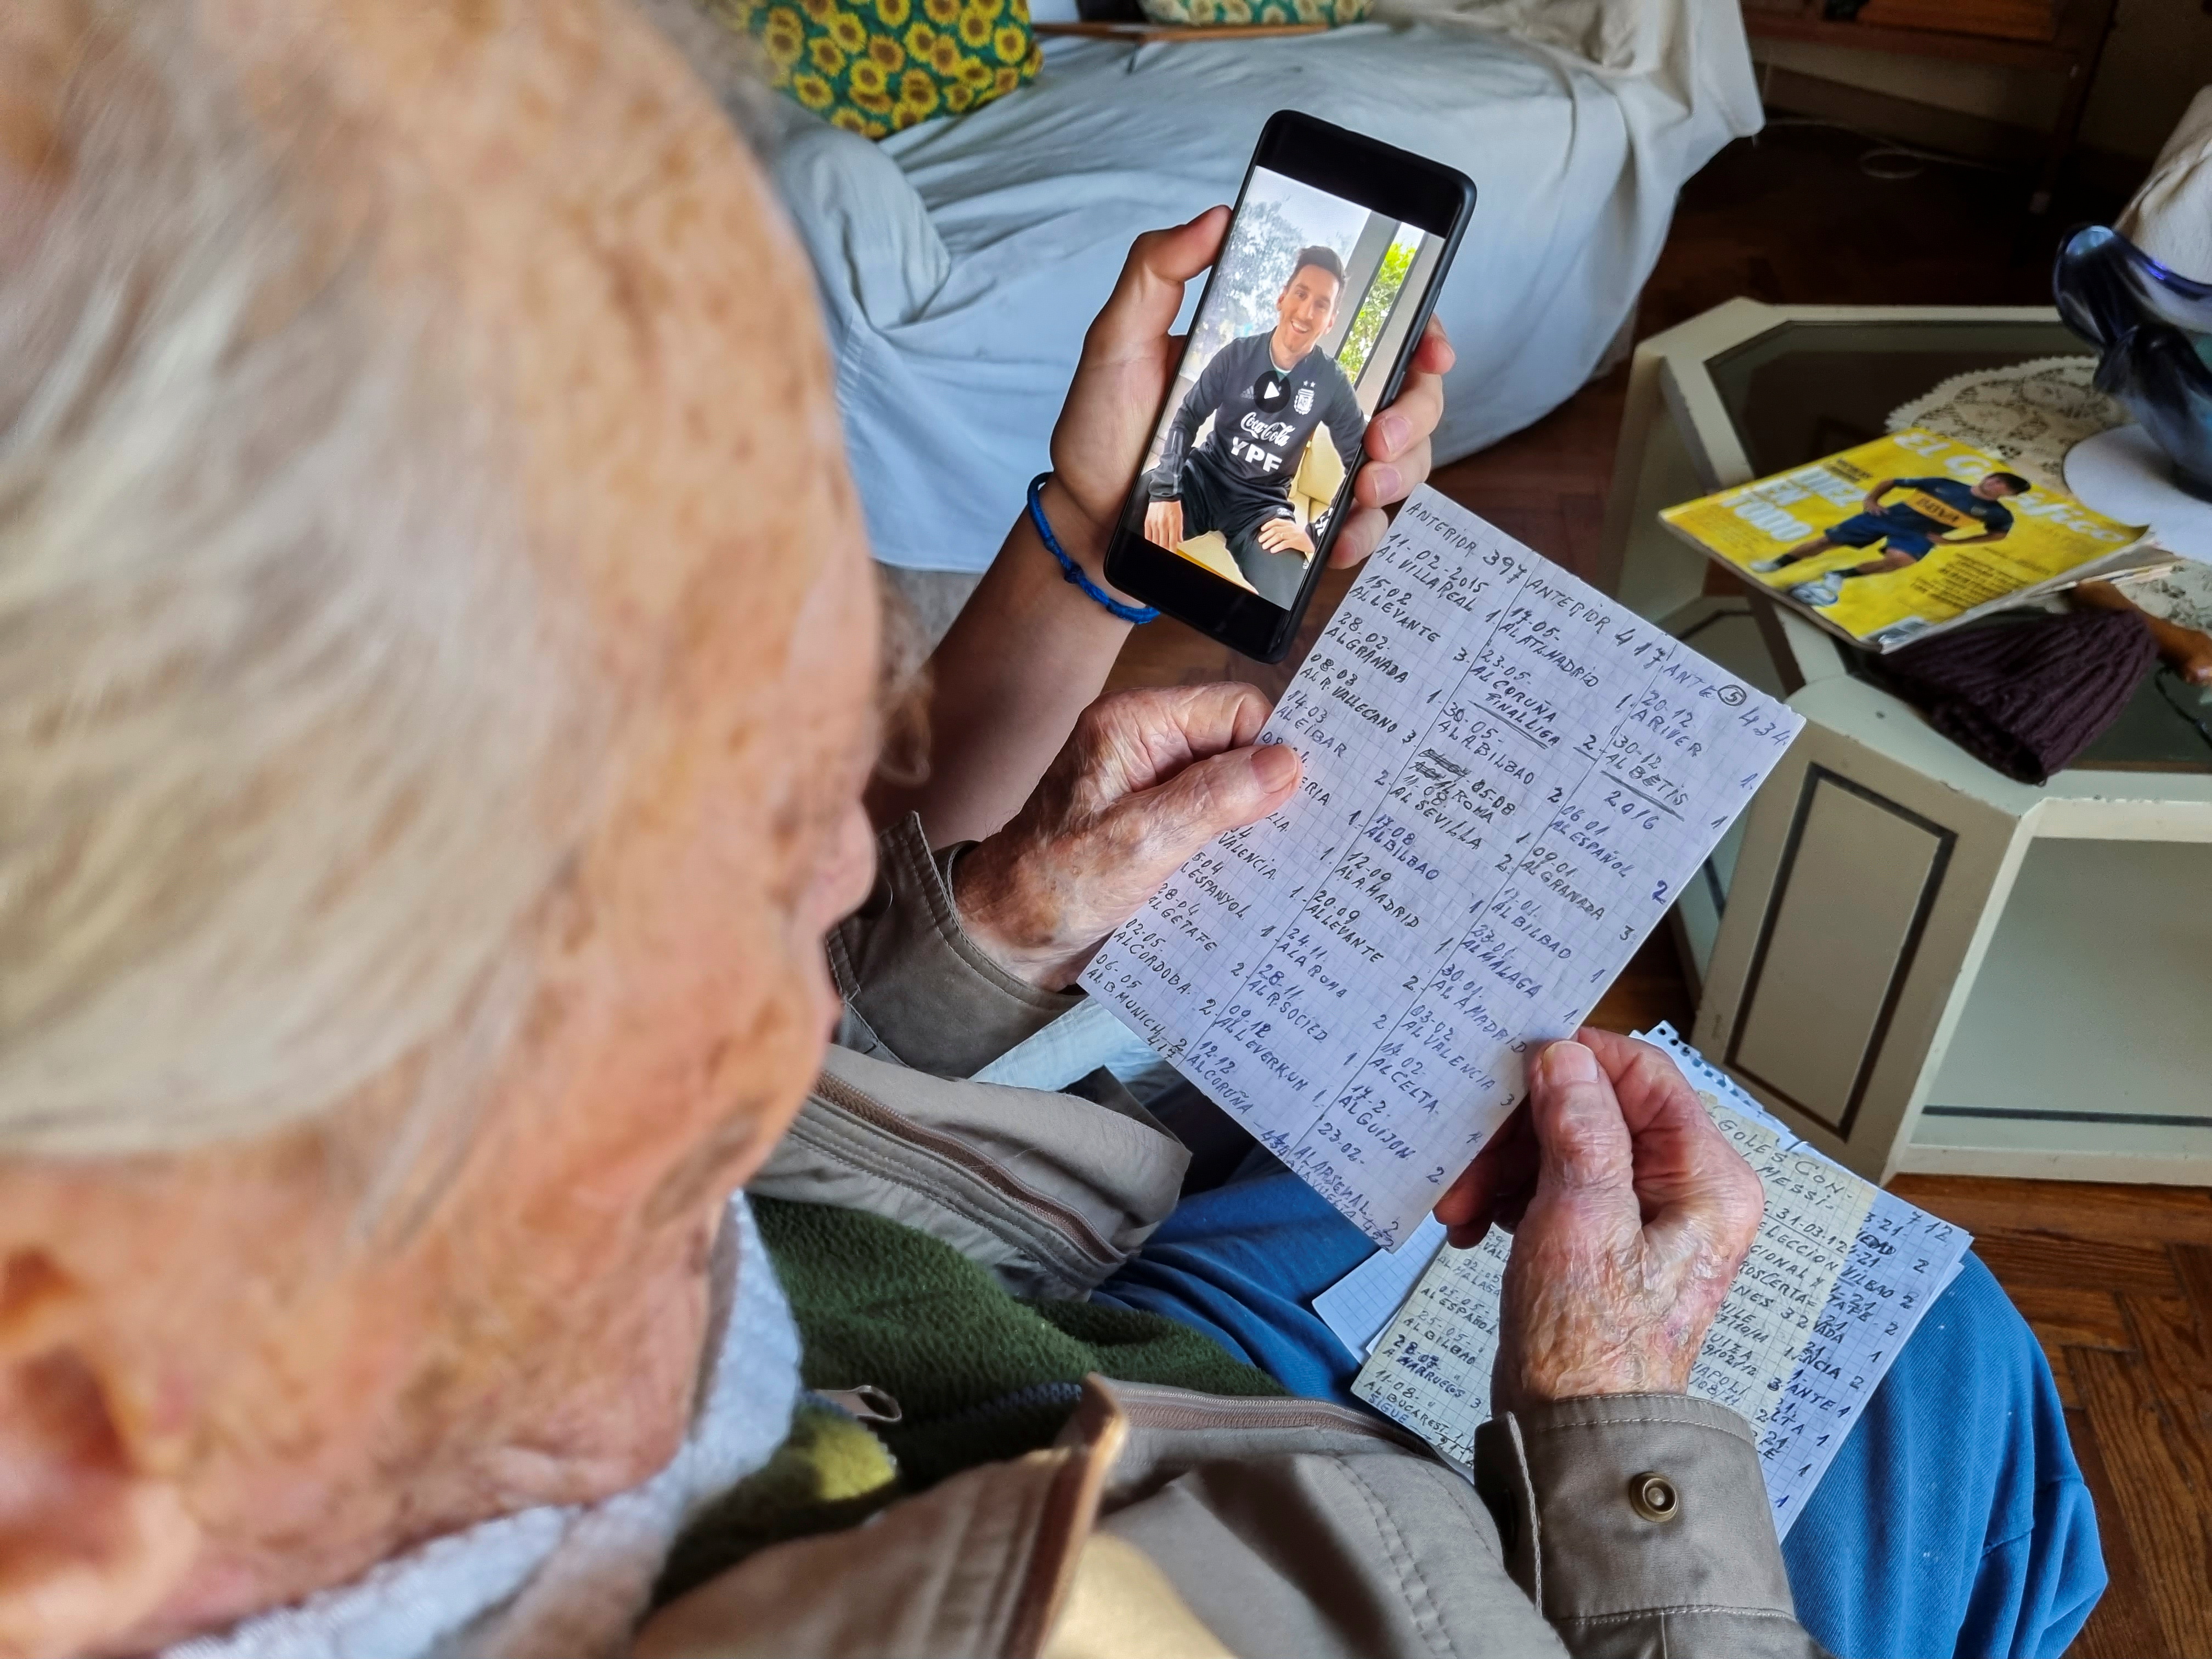 Hernan Mastrangelo, a 100-year-old fan of Lionel Messi, writes down all of Messi's goals in his notebook in Buenos Aires